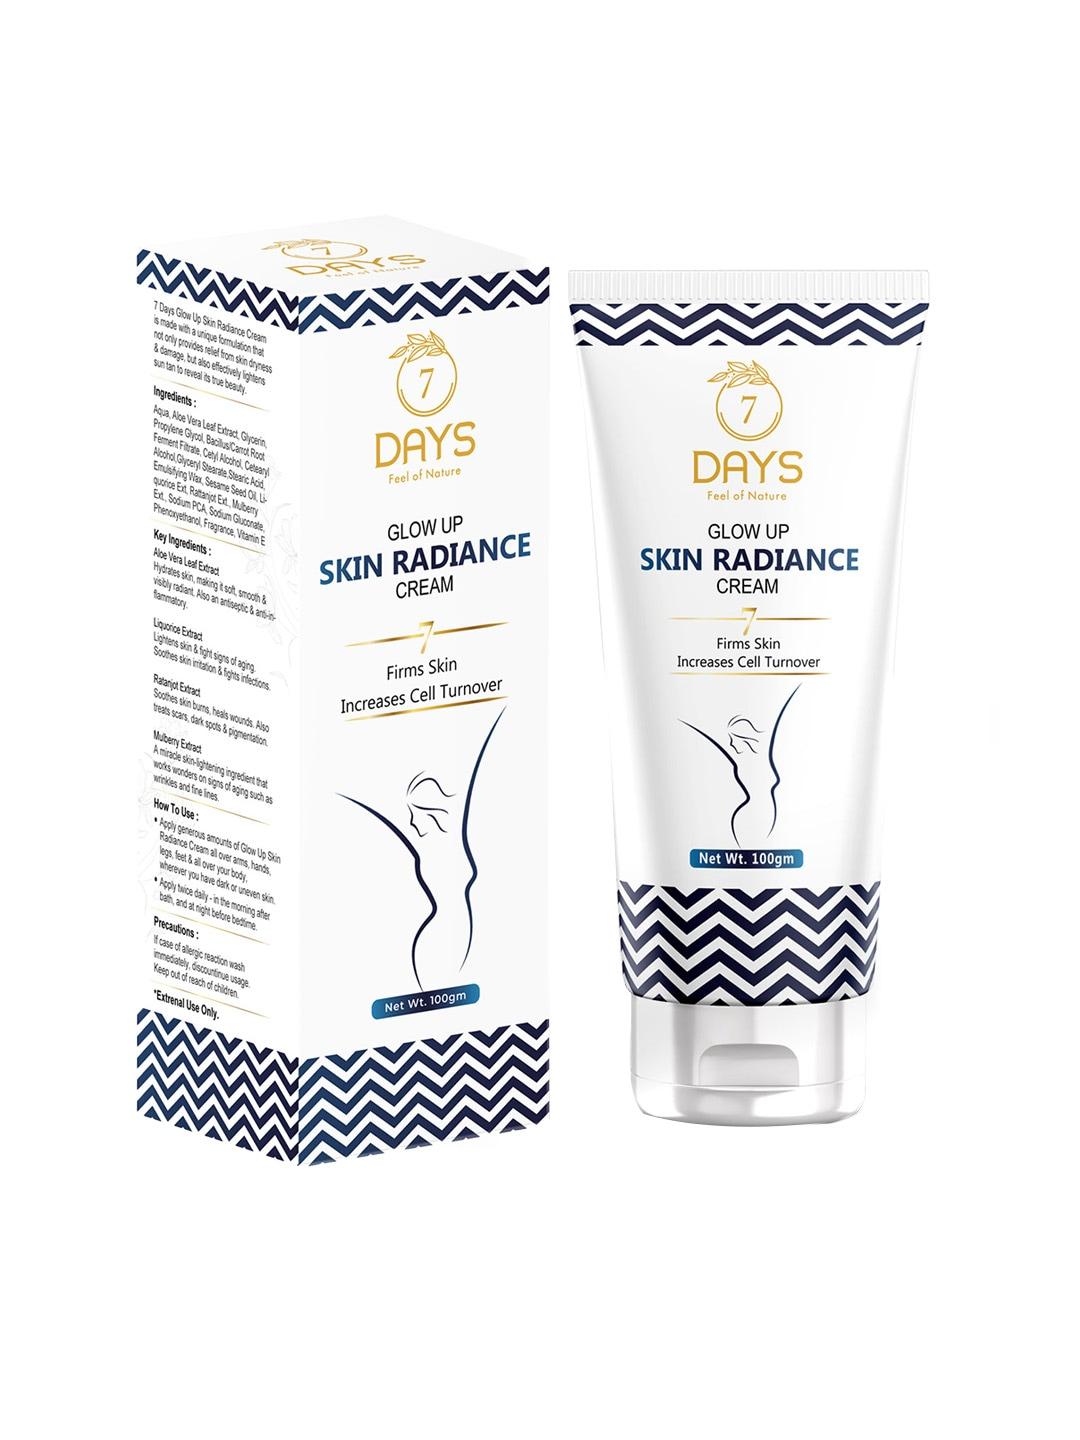 7 DAYS Glow Up Skin Radiance Cream to Increase Cell Turnover with Aloe Vera - 100 g